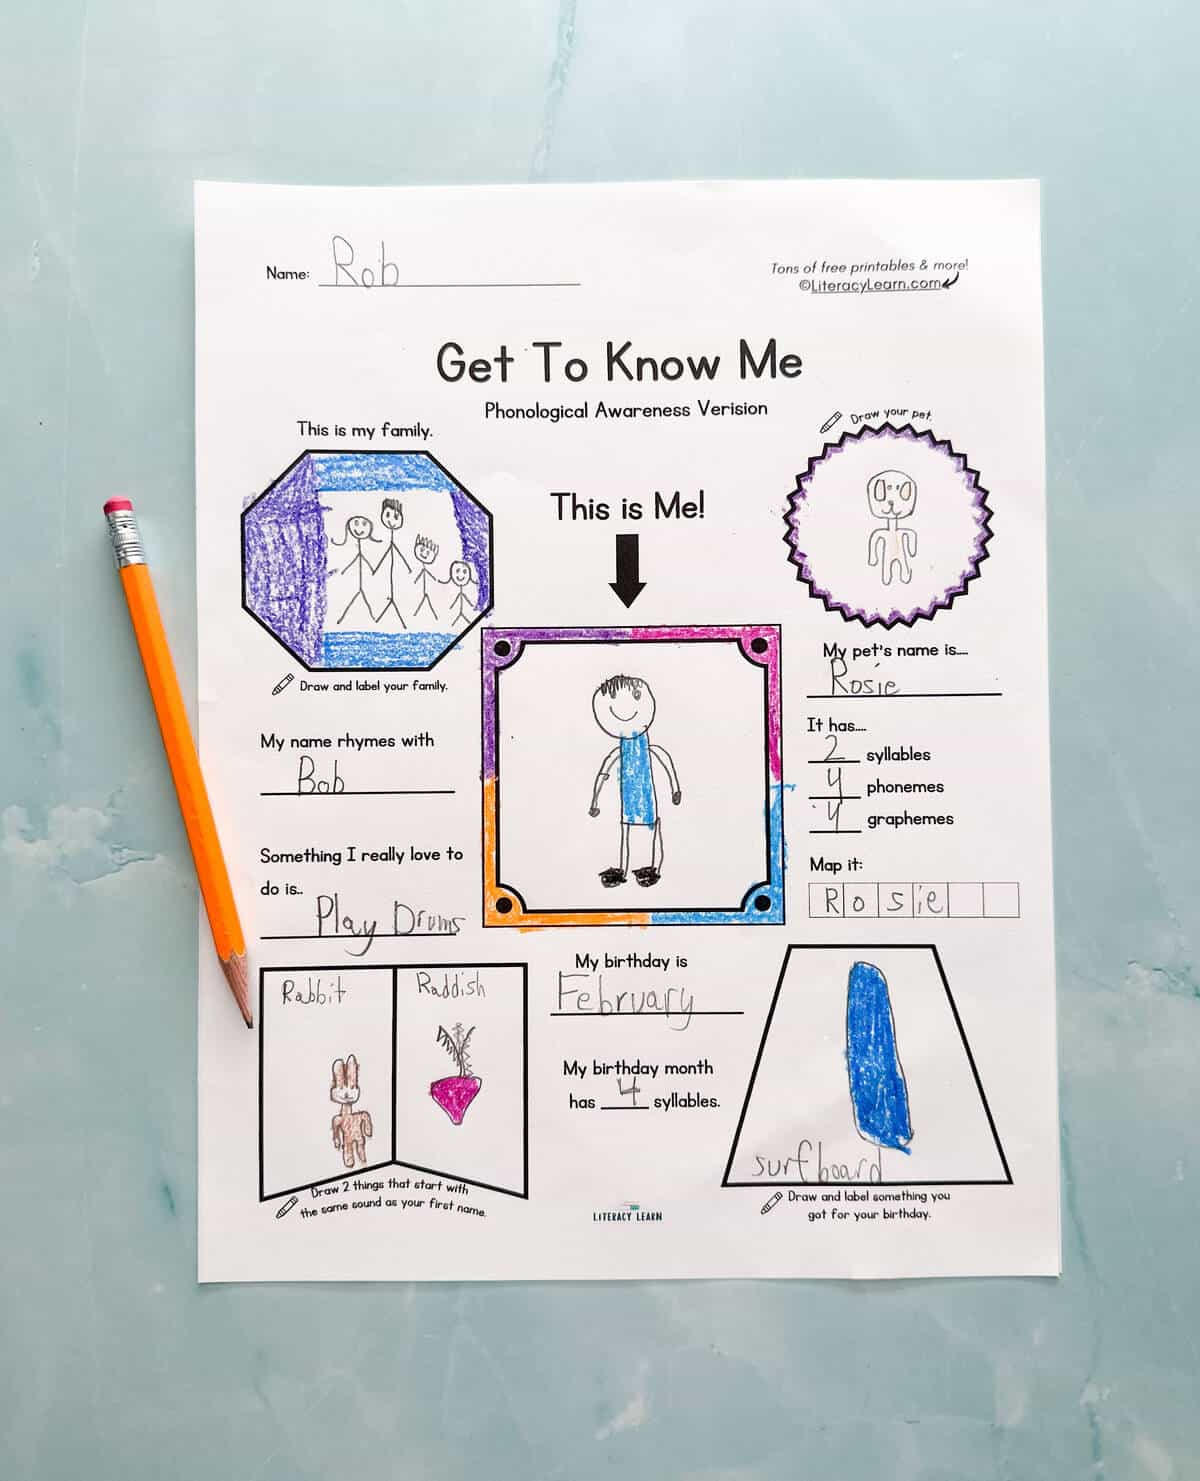 A child's completed Get to Know Me Phonological Awareness worksheet.